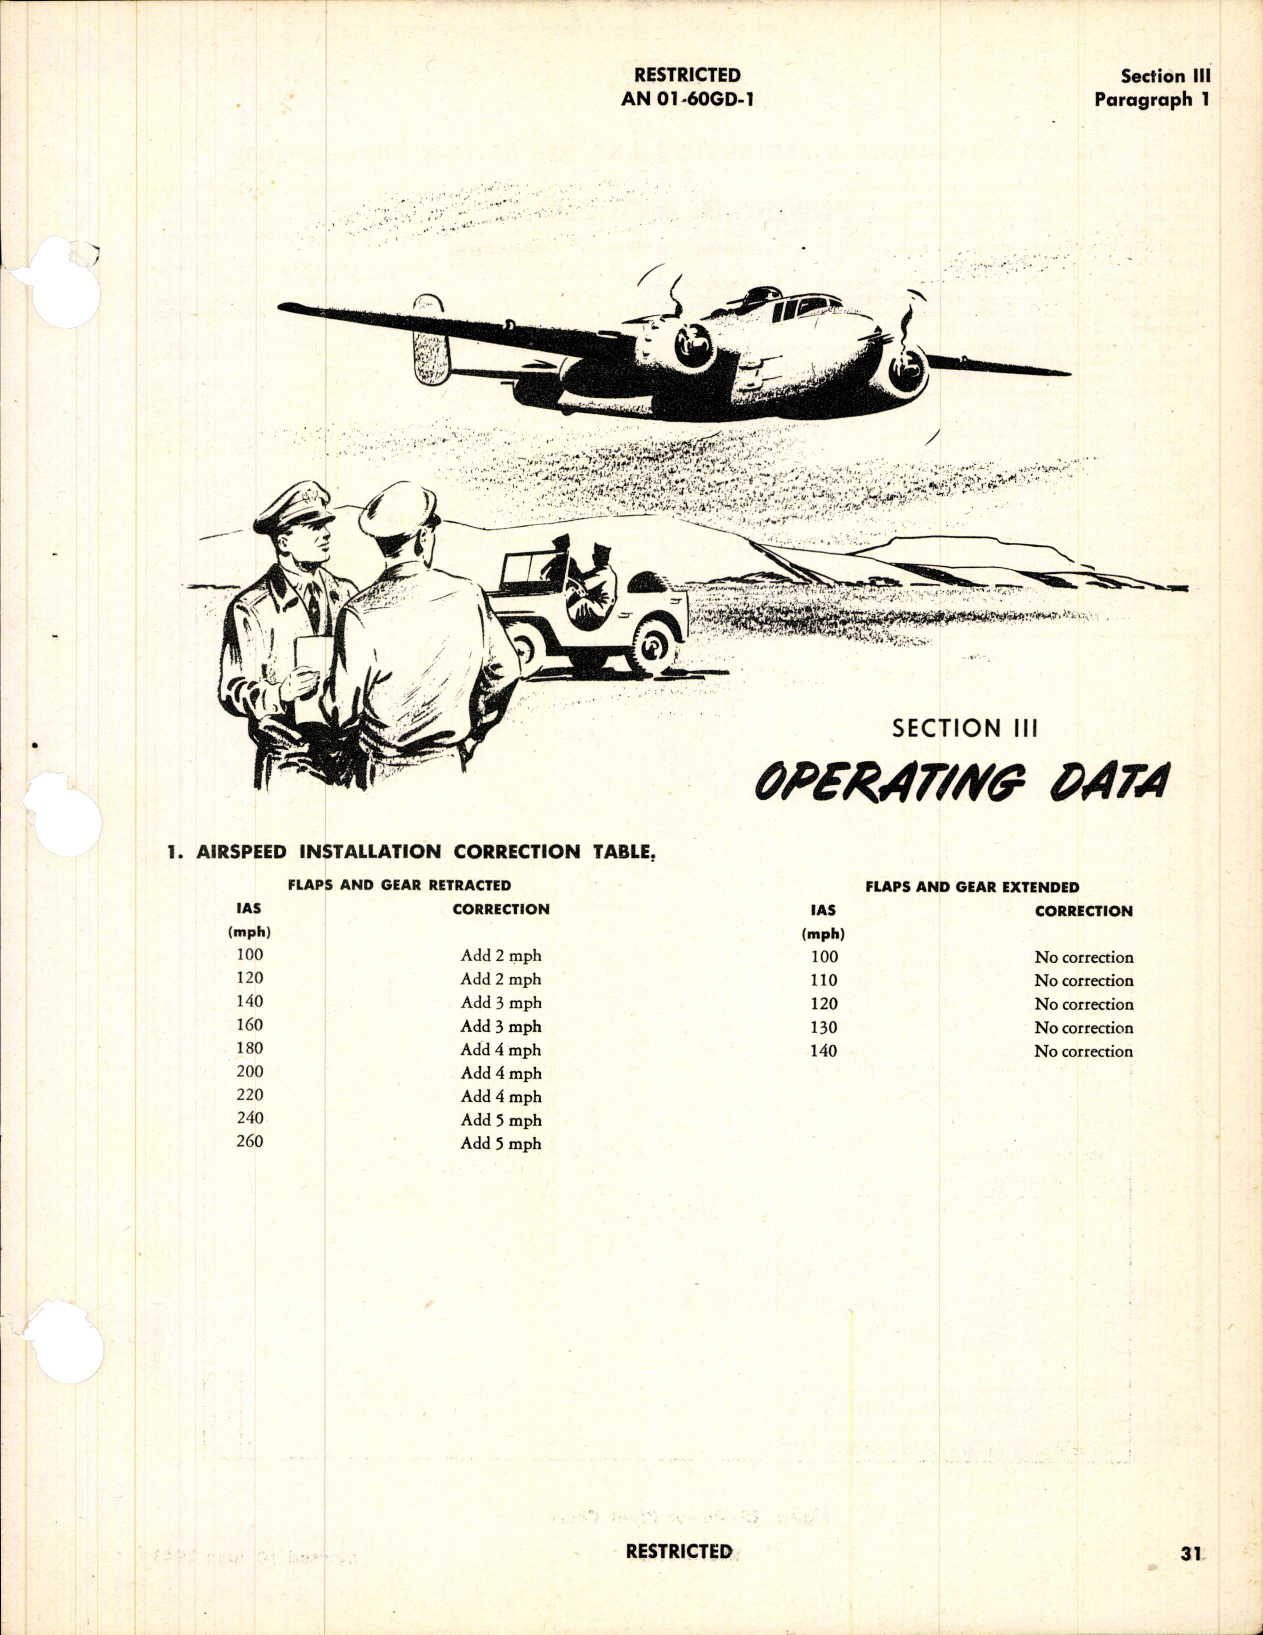 Sample page 5 from AirCorps Library document: Pilot's Flight Operating Instructions for B-25H and PBJ-1H